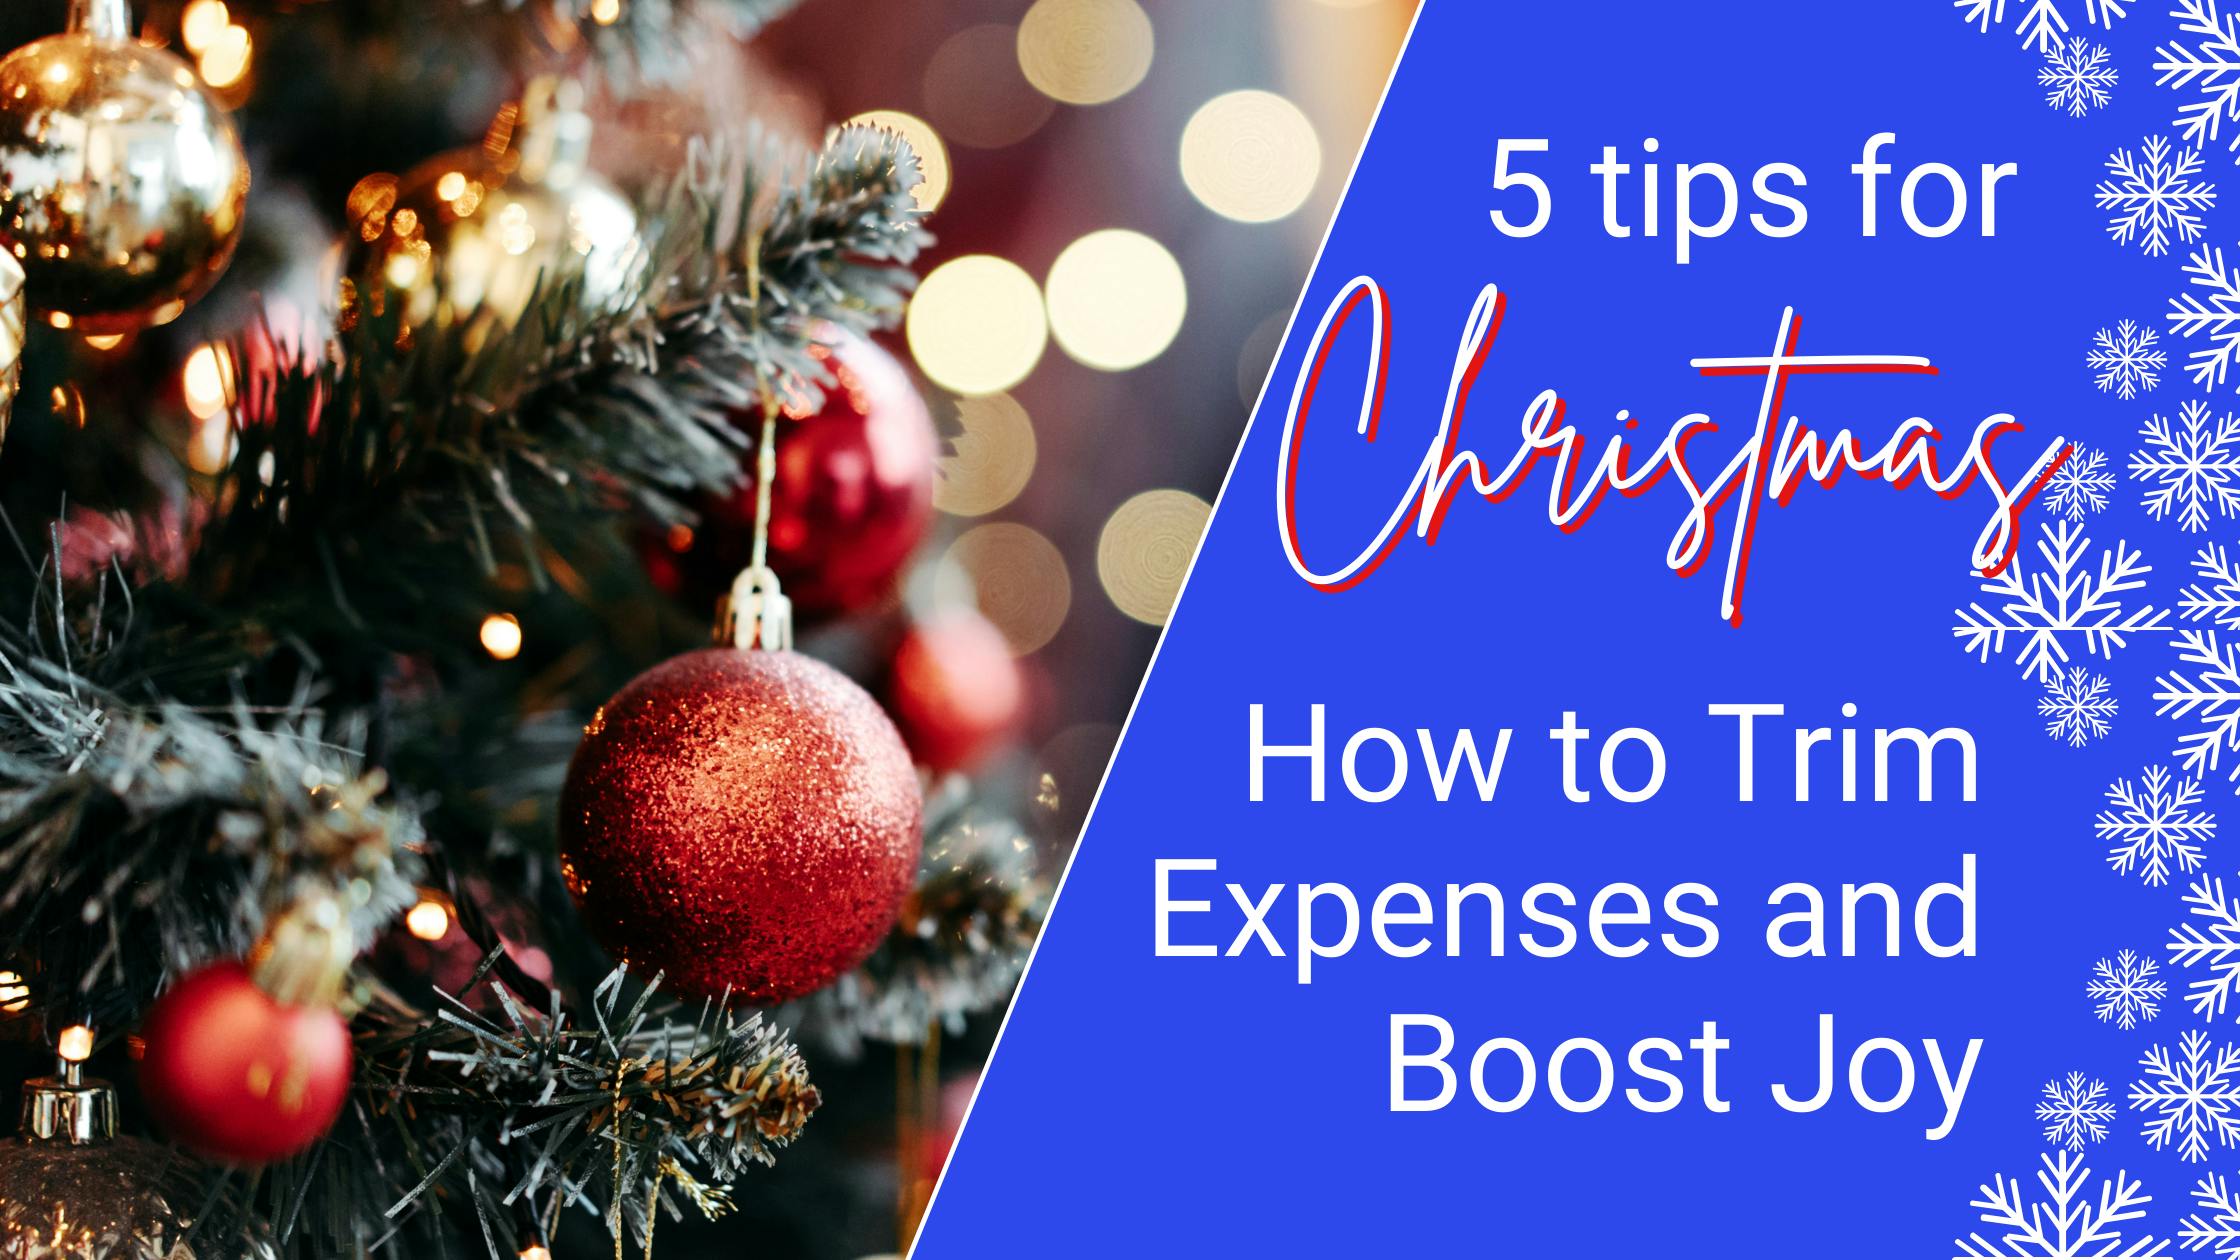 Smart Holiday Savings Tips: How to Trim Expenses and Boost Joy